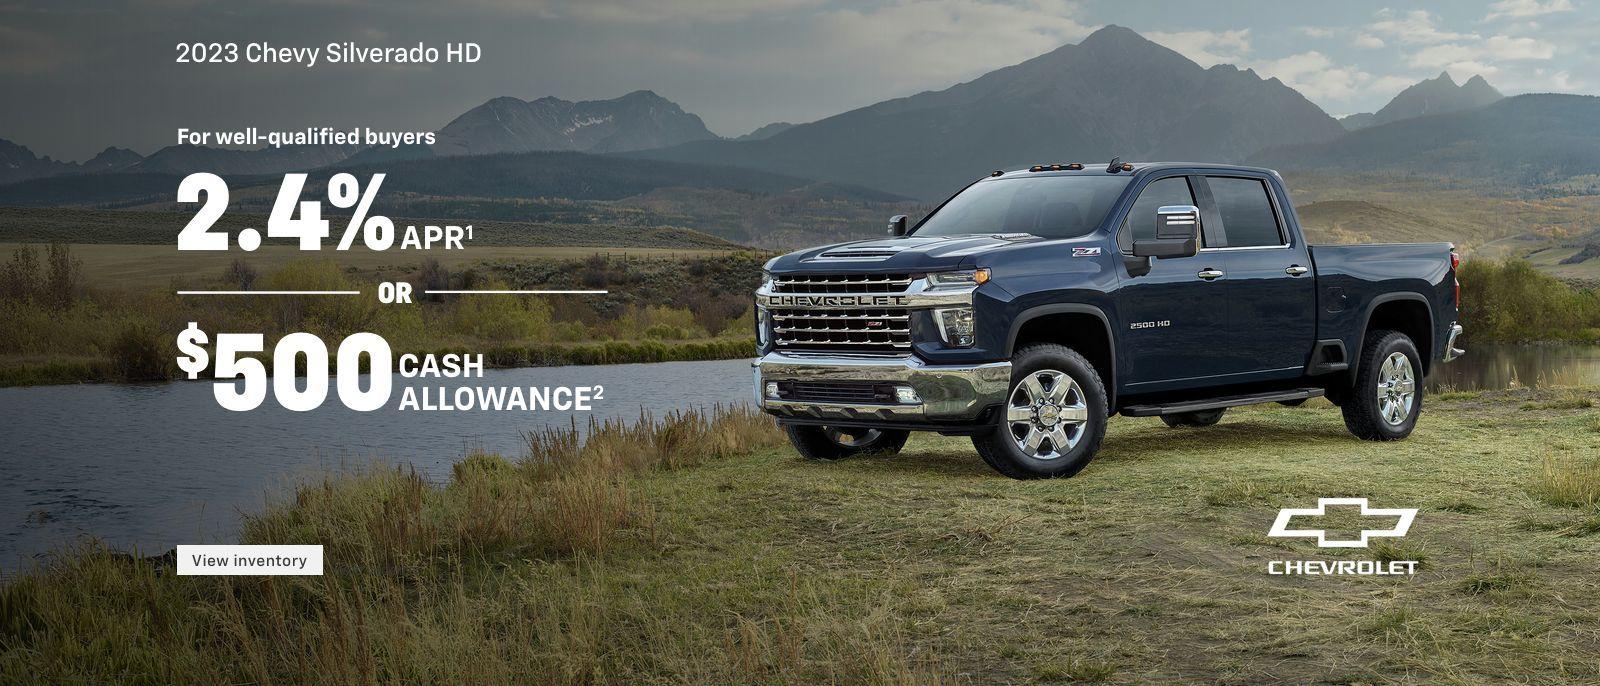 2023 Chevy Silverado HD. It all starts with a Chevrolet. For well-qualified buyers 2.4% APR. Or, $500 cash allowance.